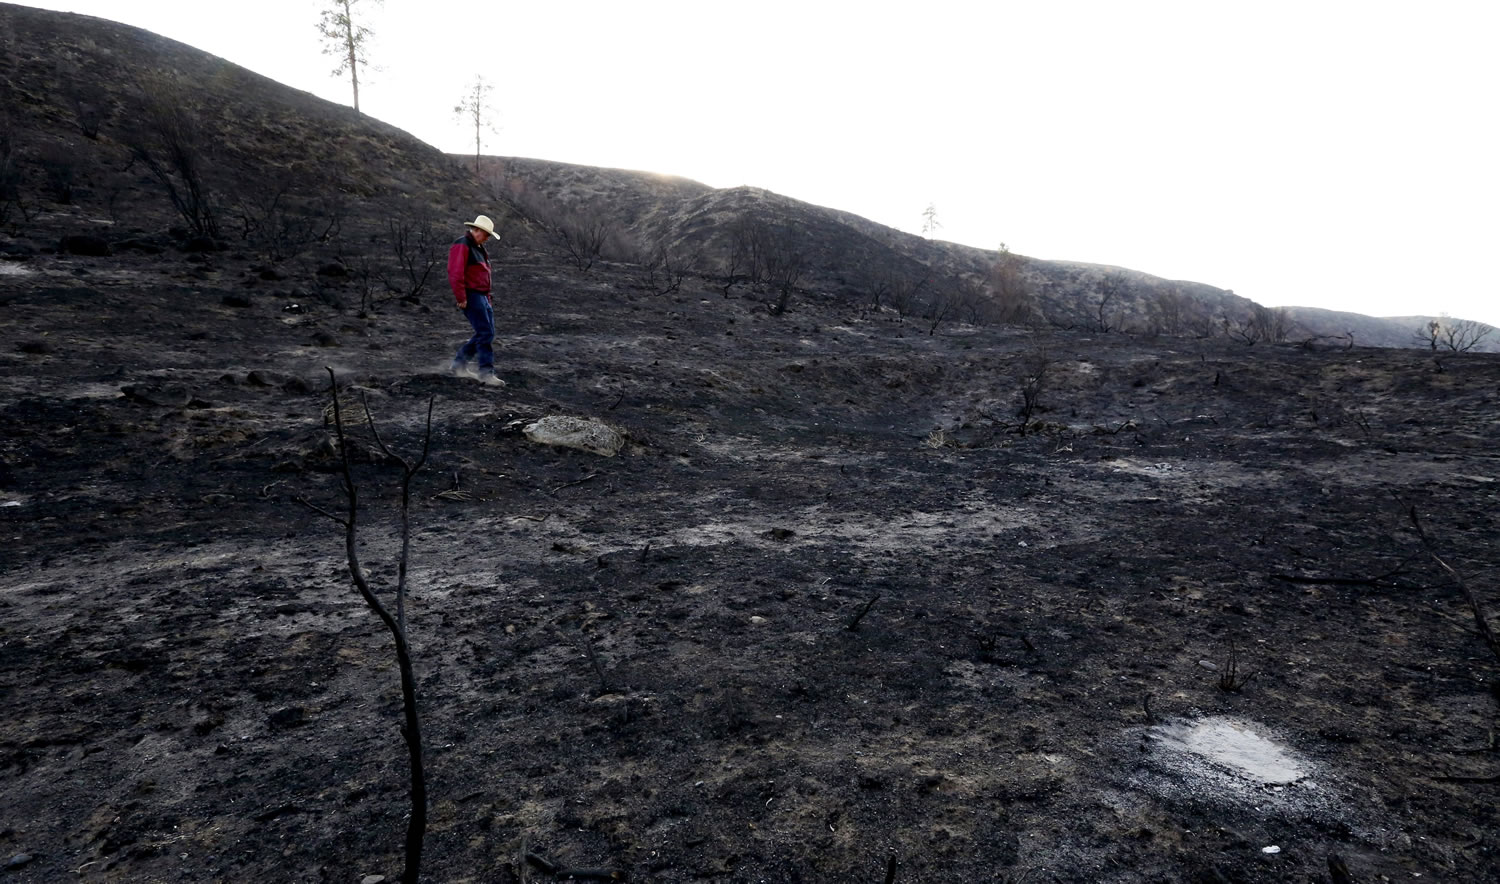 This Sept. 2, 2015 photo shows Rod Haeberle walking near what used to be his property. Haeberle lost 40 miles of fence to the Okanogan wildfires.